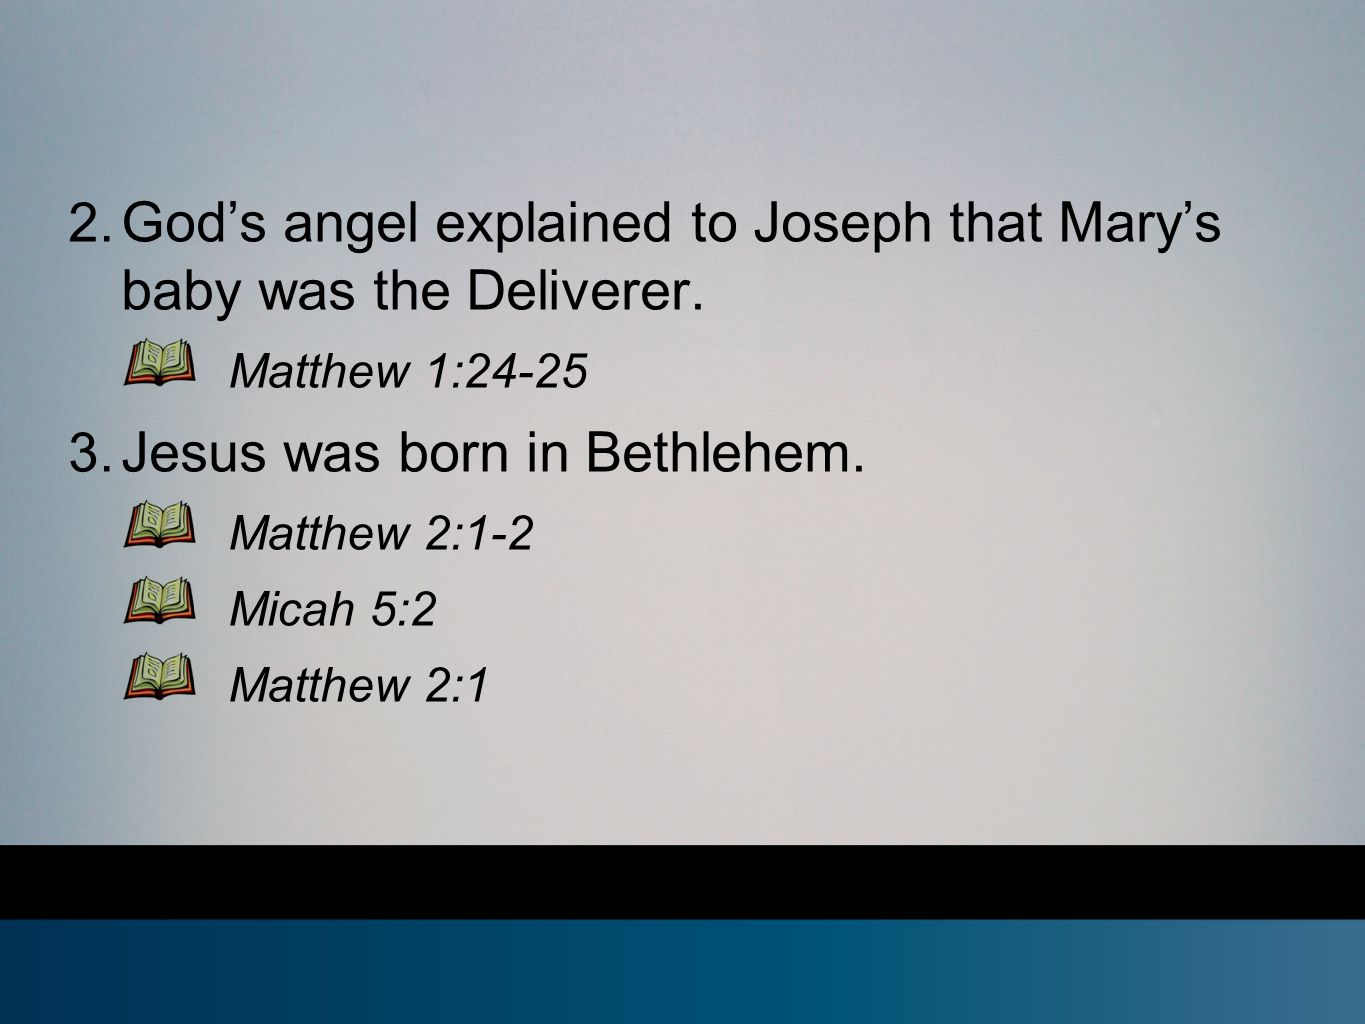 2. God’s angel explained to Joseph that Mary’s baby was the Deliverer.